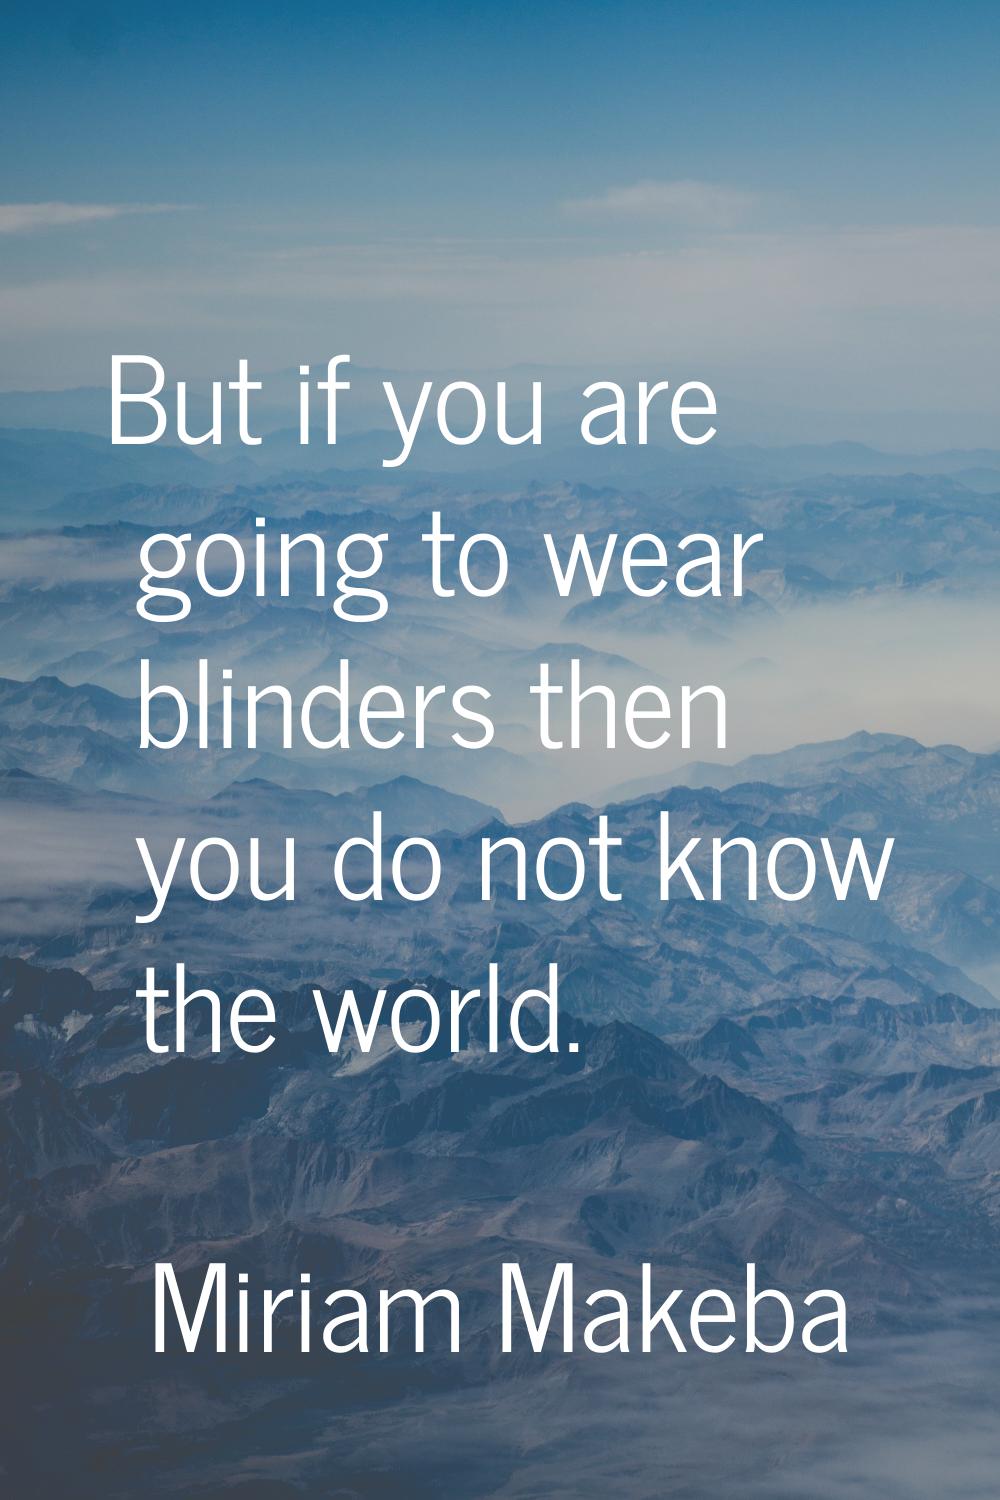 But if you are going to wear blinders then you do not know the world.